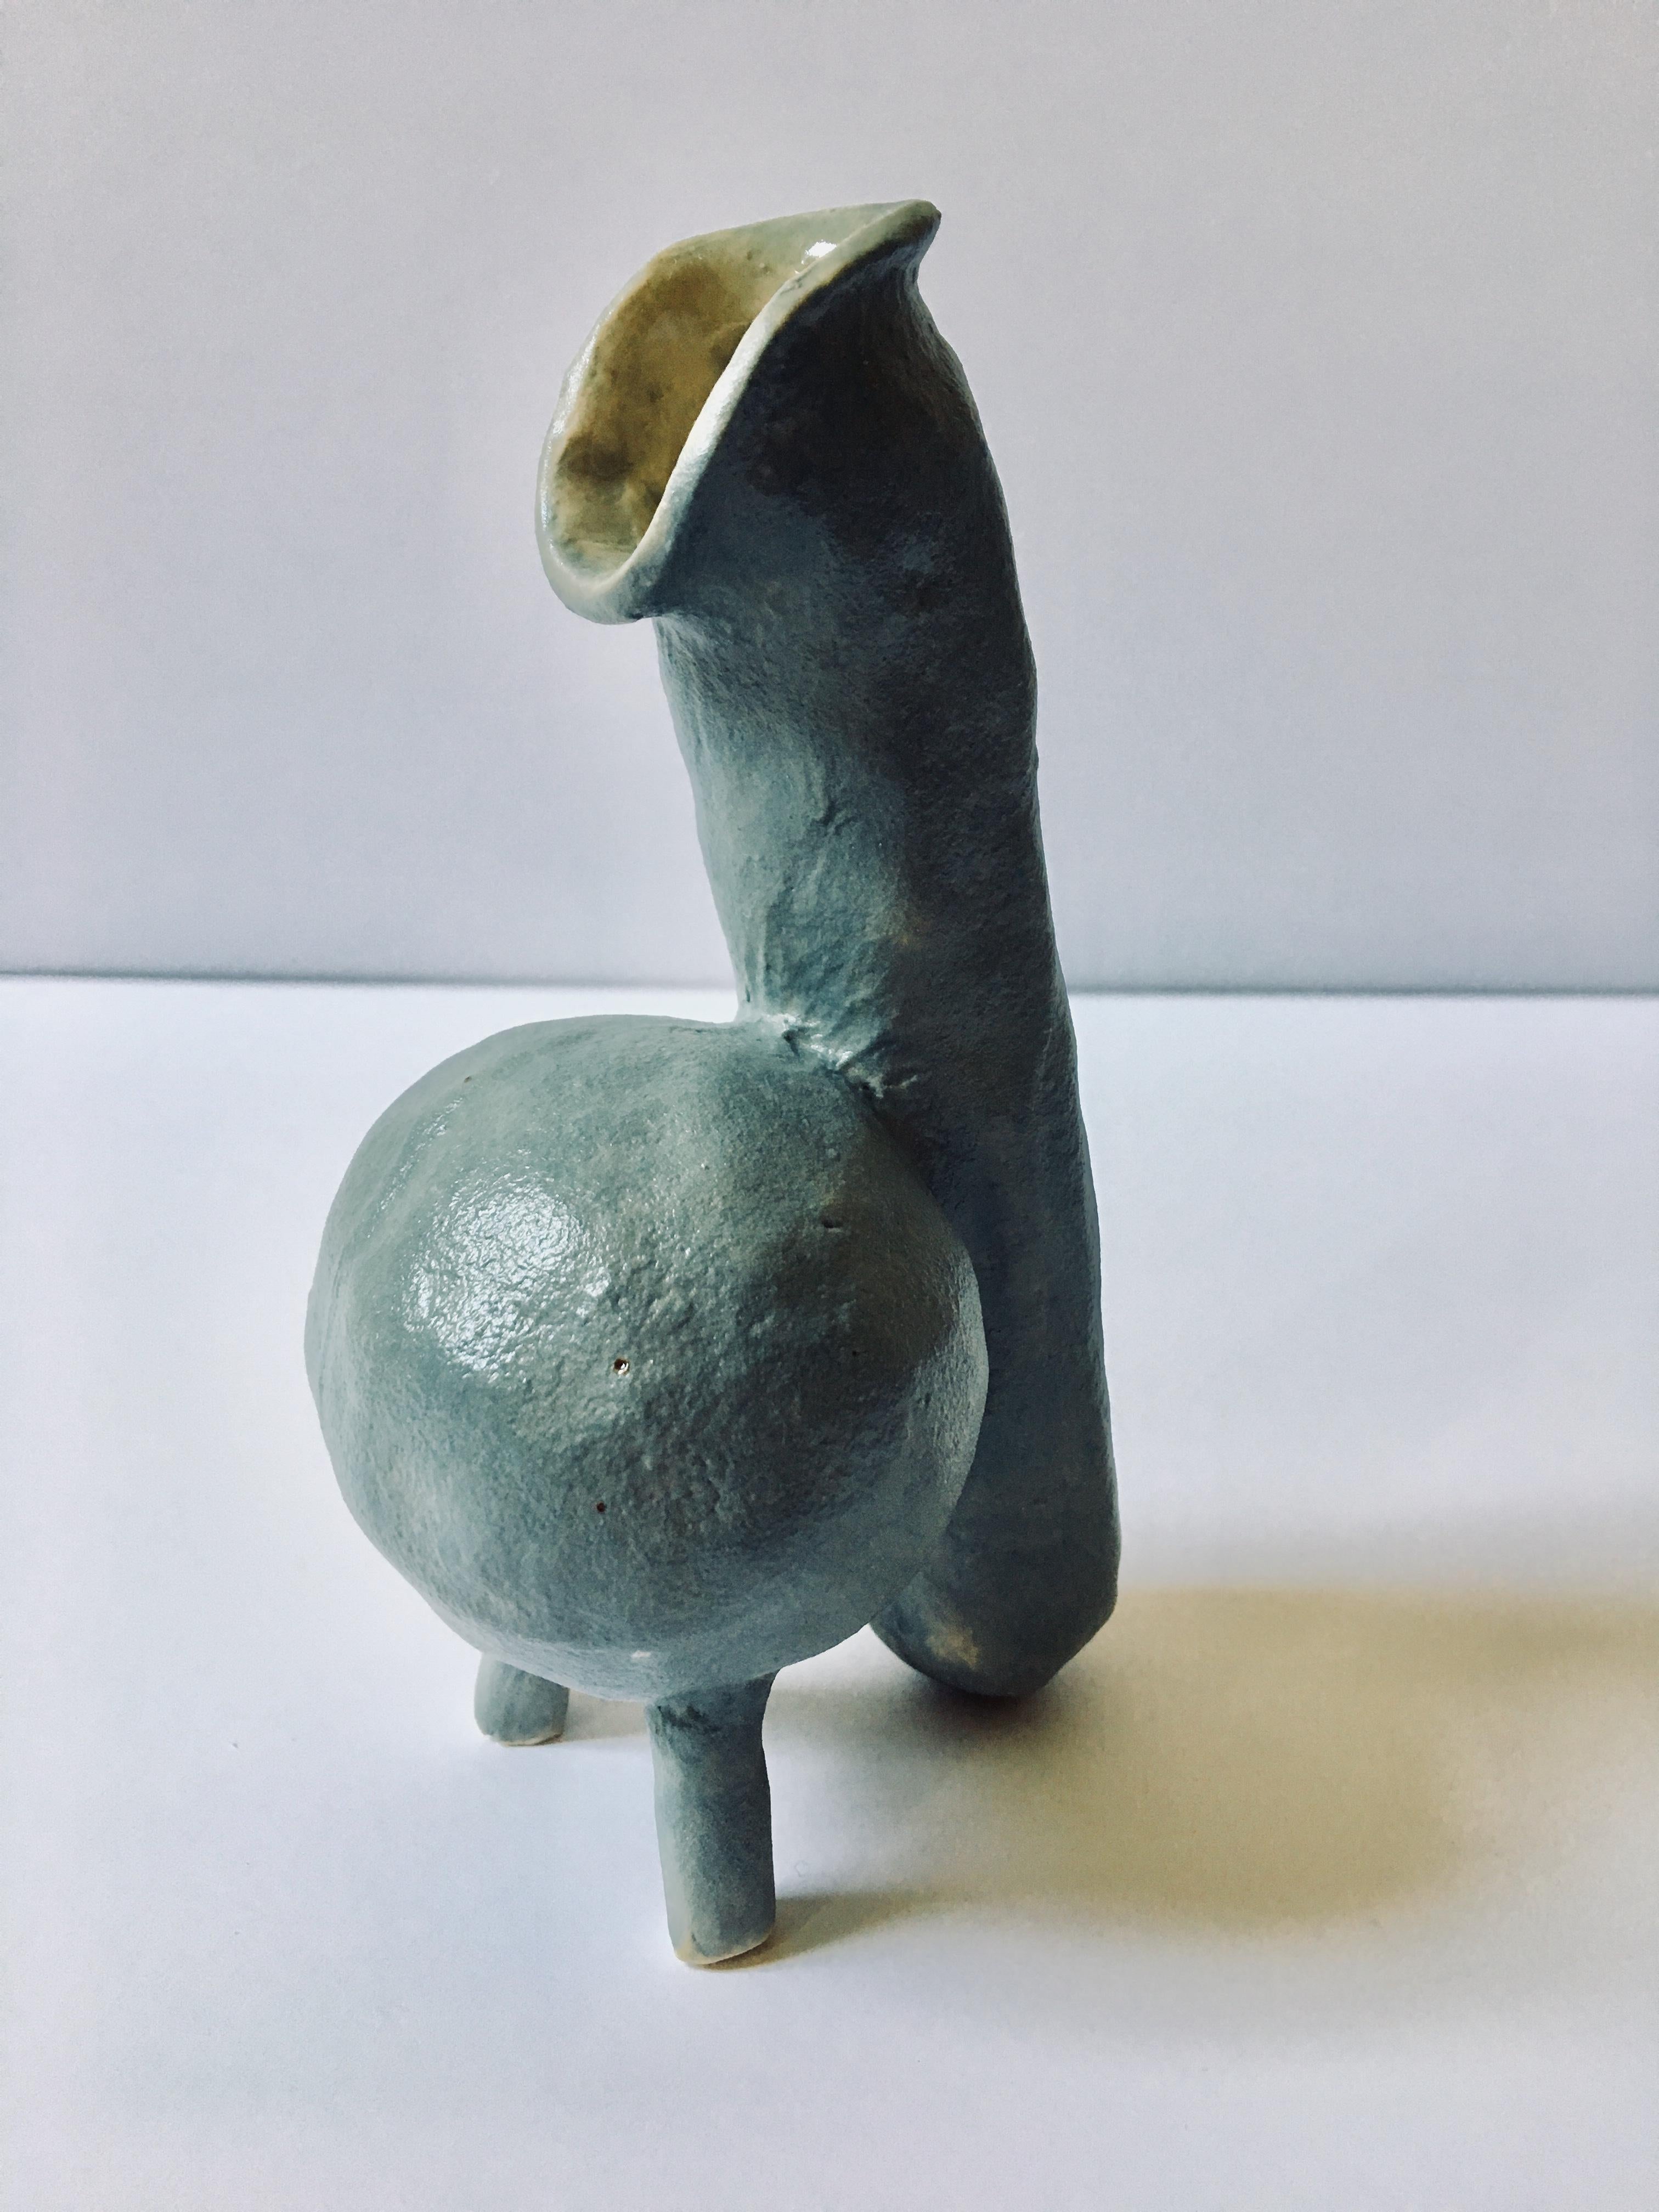 Abstract  Ceramic Vessel Sculpture: 'Creature Small No 4' - Gray Abstract Sculpture by Ak Jansen